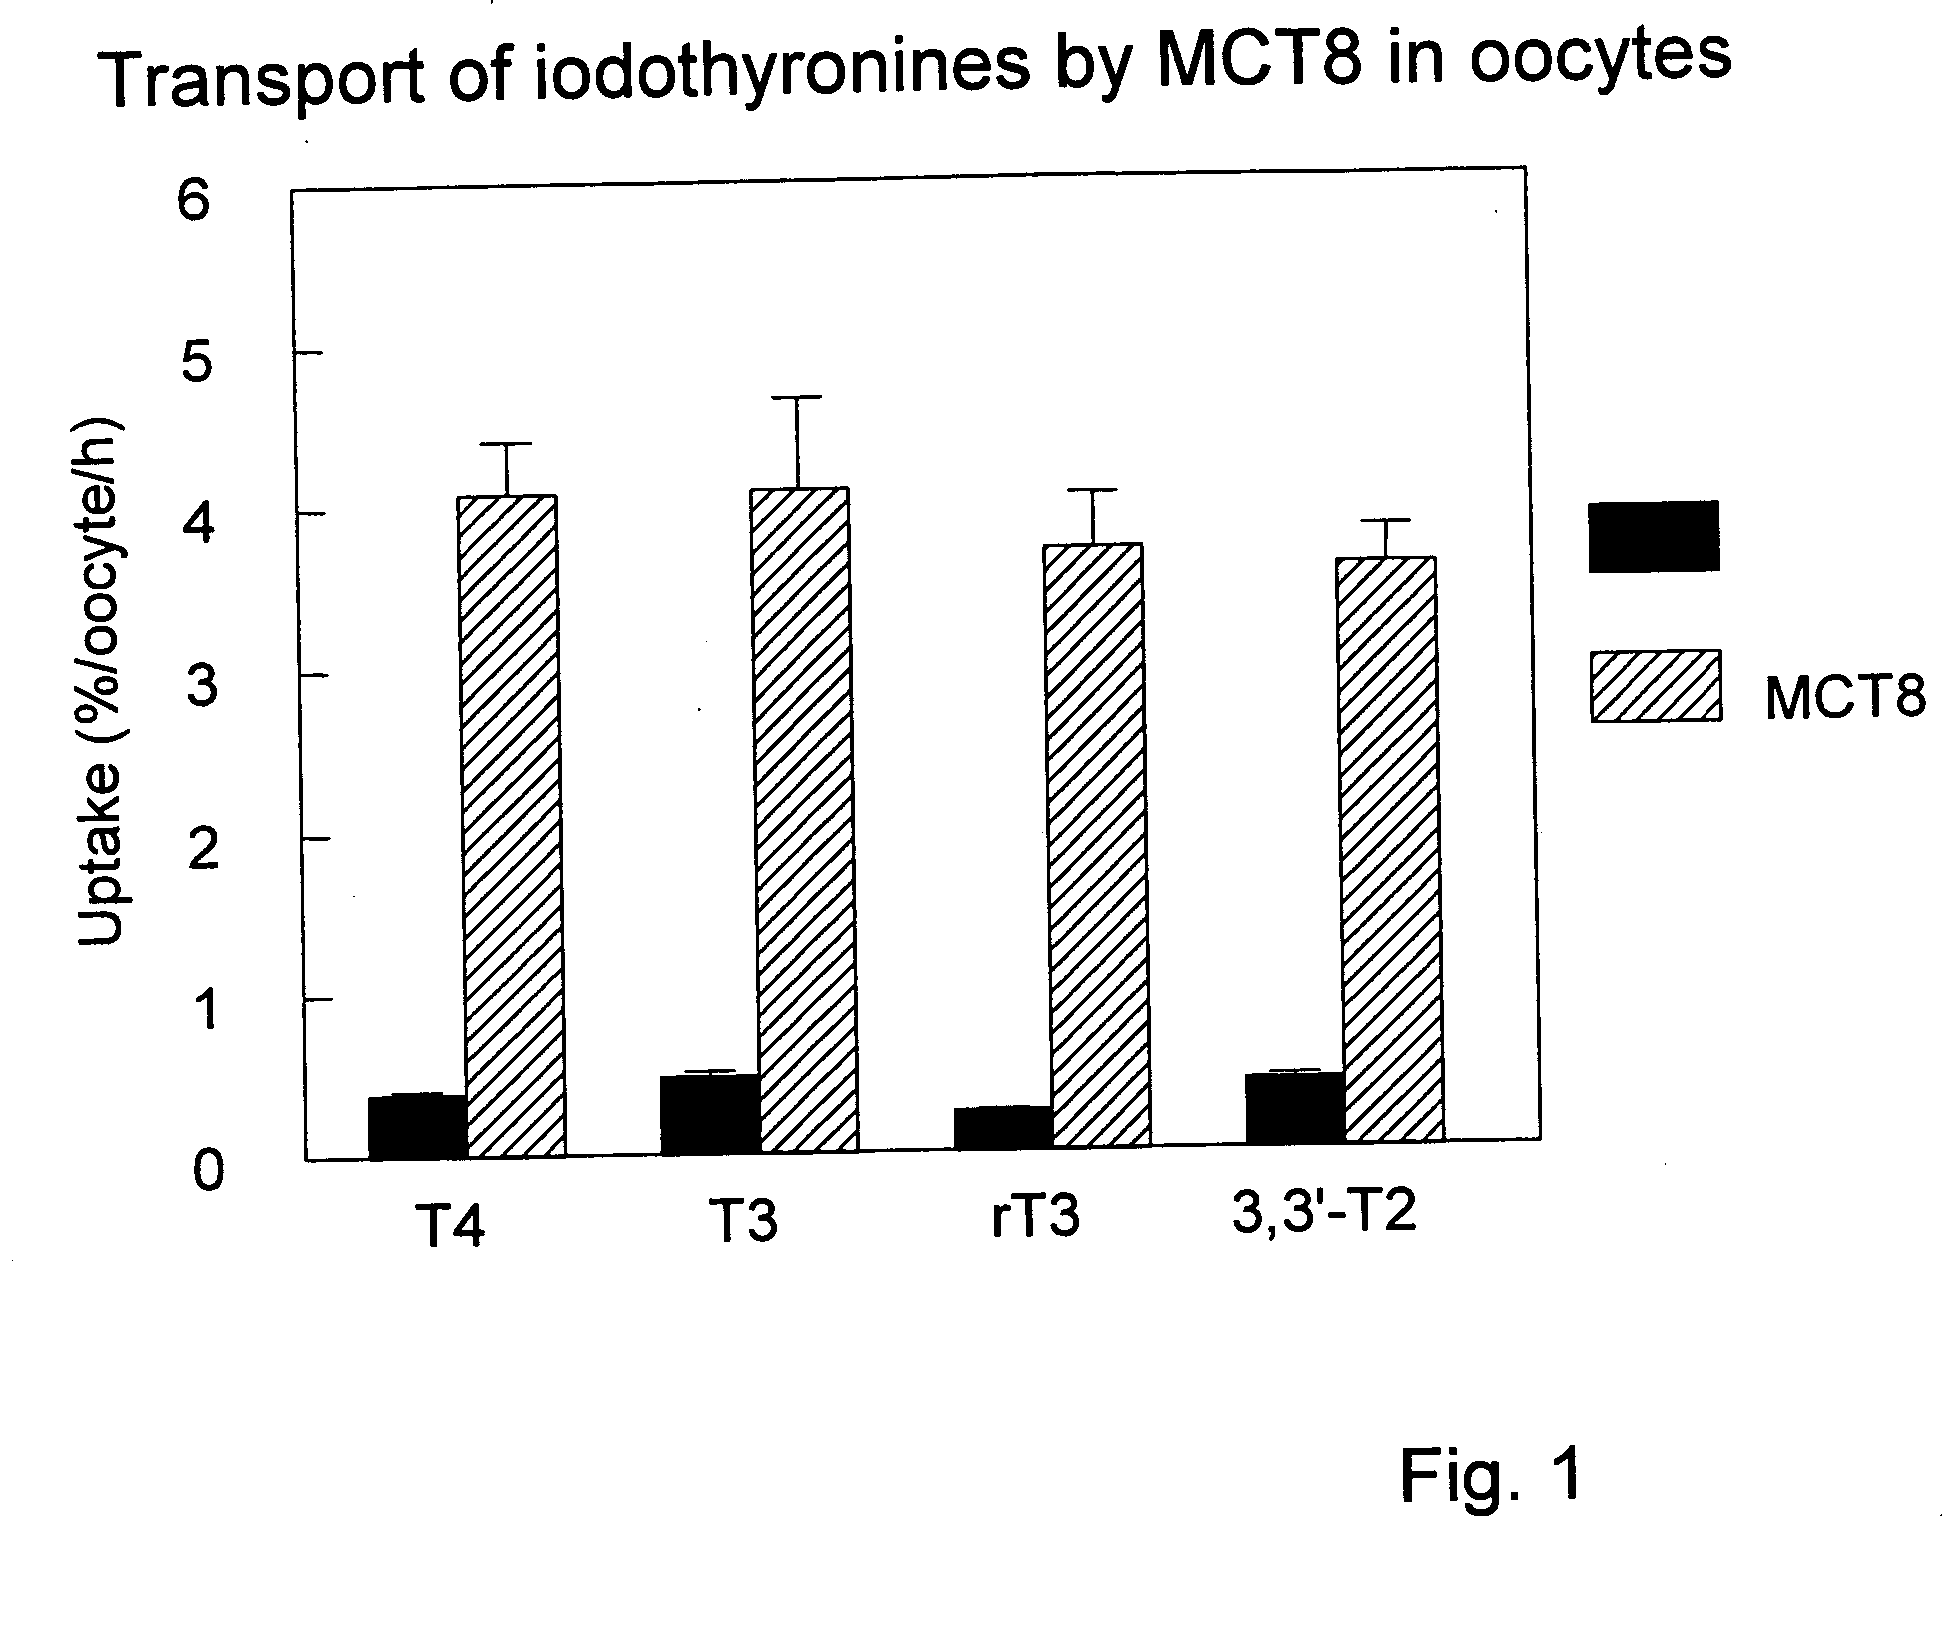 Use of monocarboxylate transporter protein for thyroid hormone transport